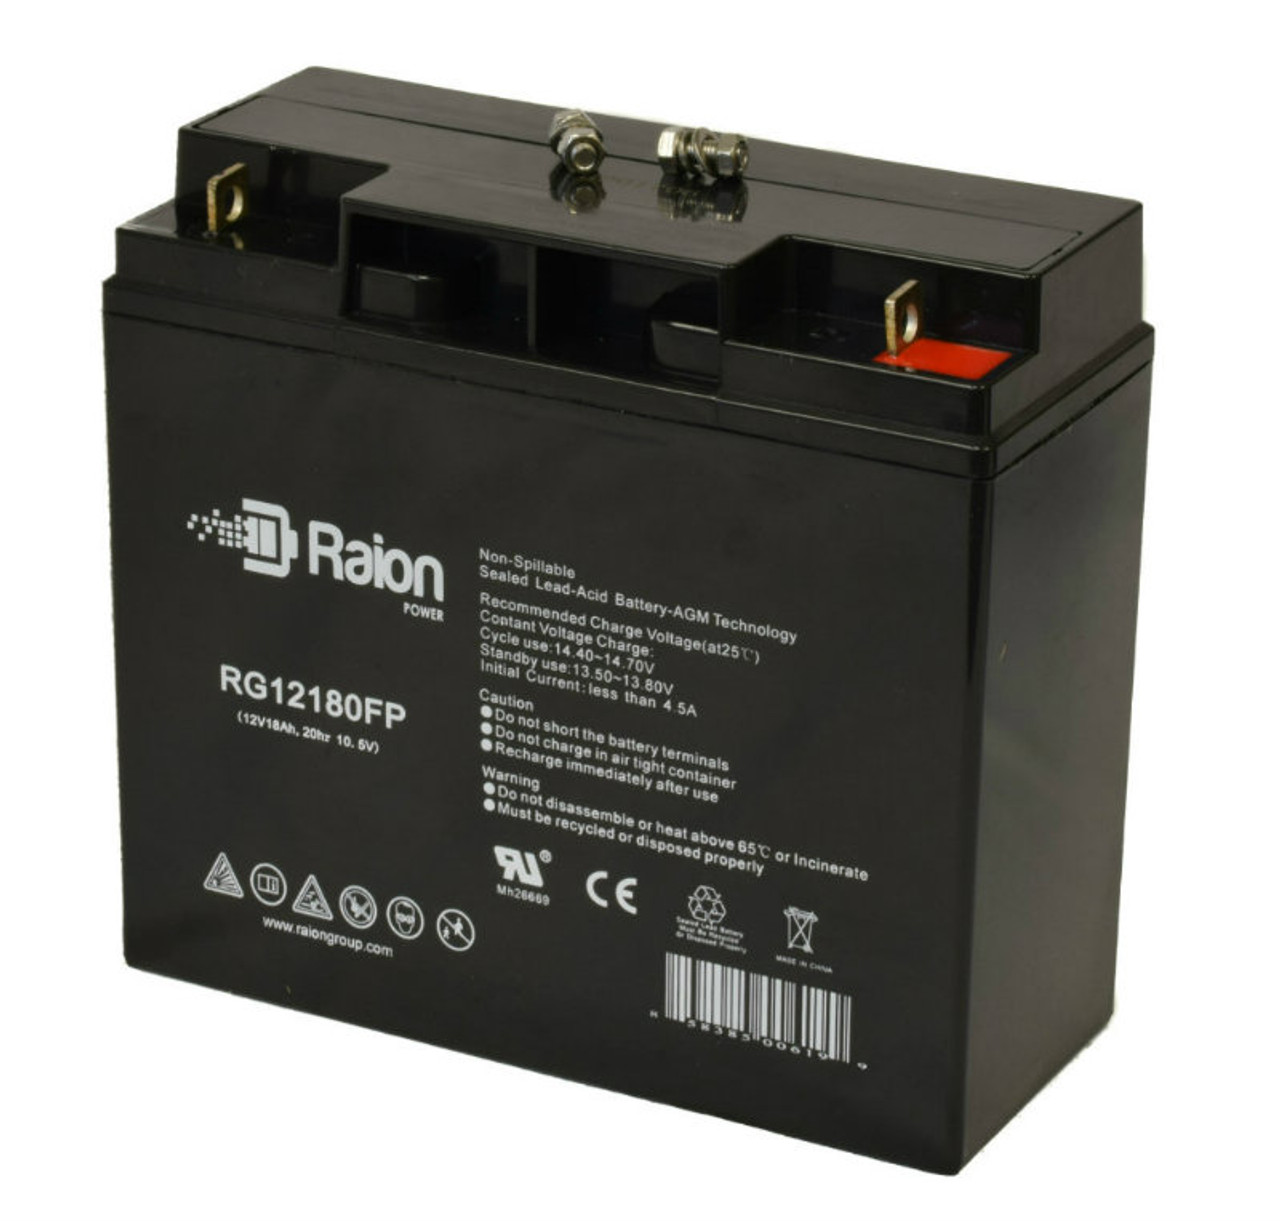 Raion Power Replacement 12V 18Ah Battery for Sealake UM1217 - 1 Pack